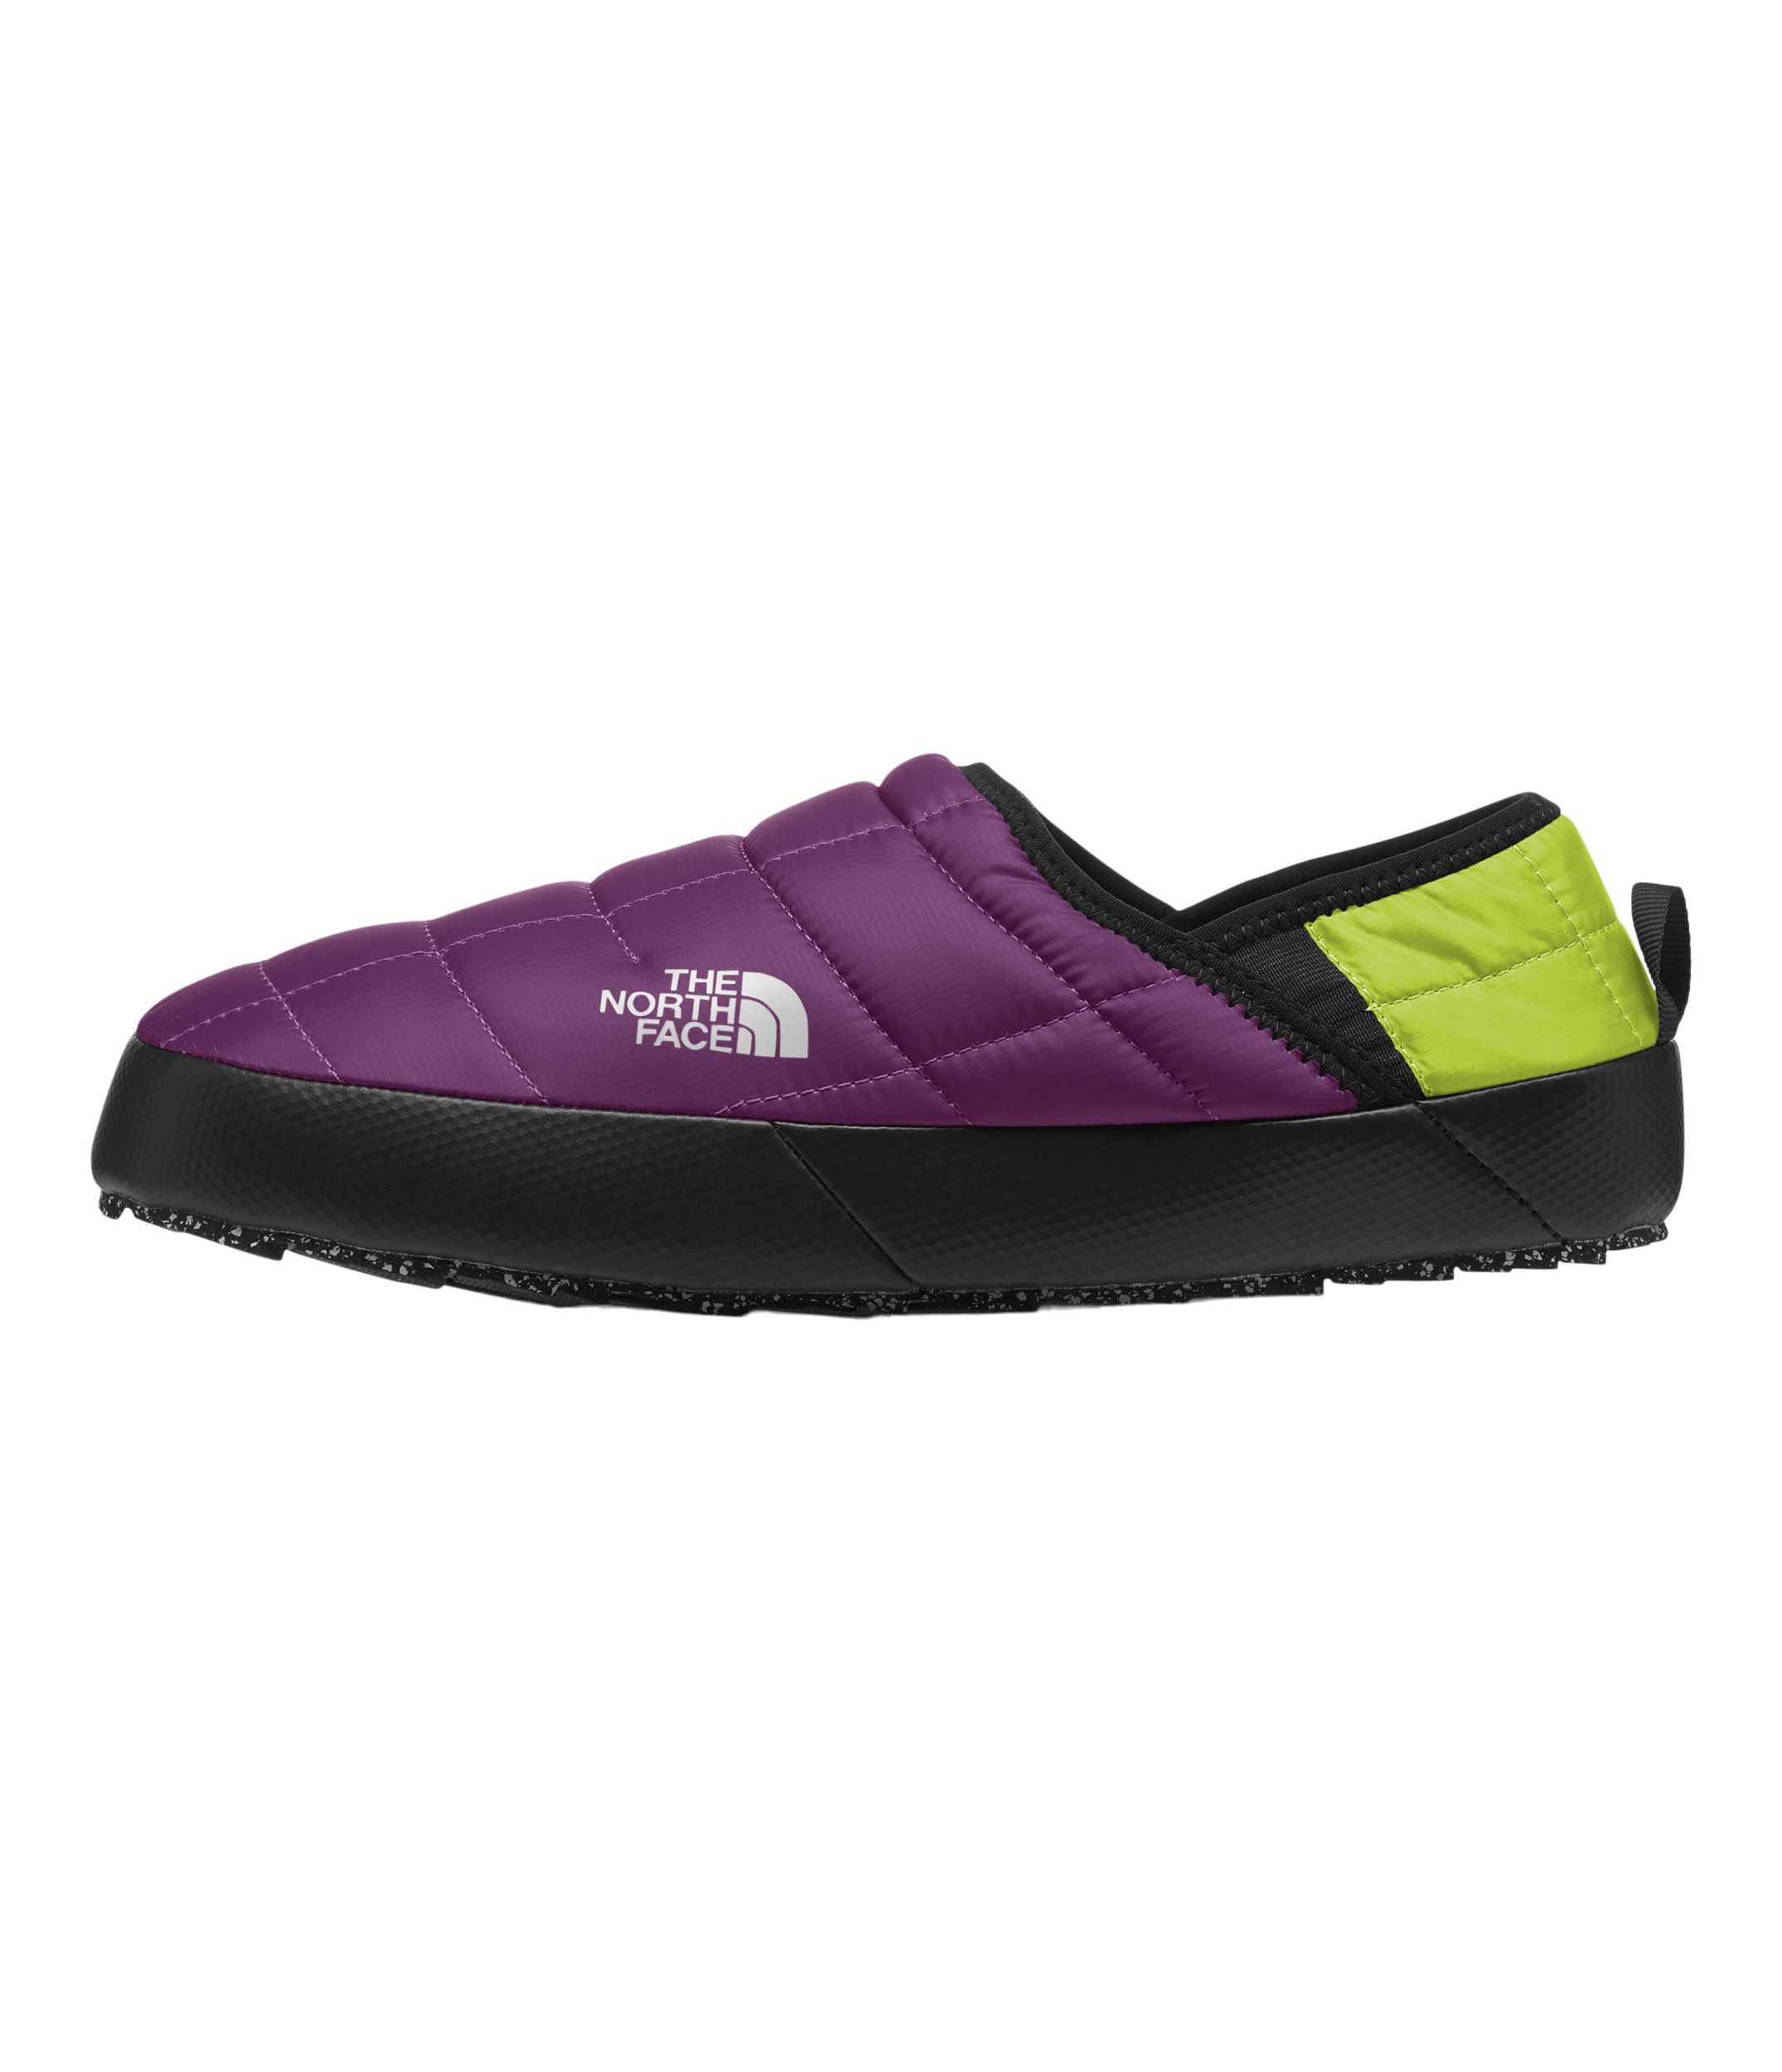 Image of The North Face Women's Traction Mule V Slippers